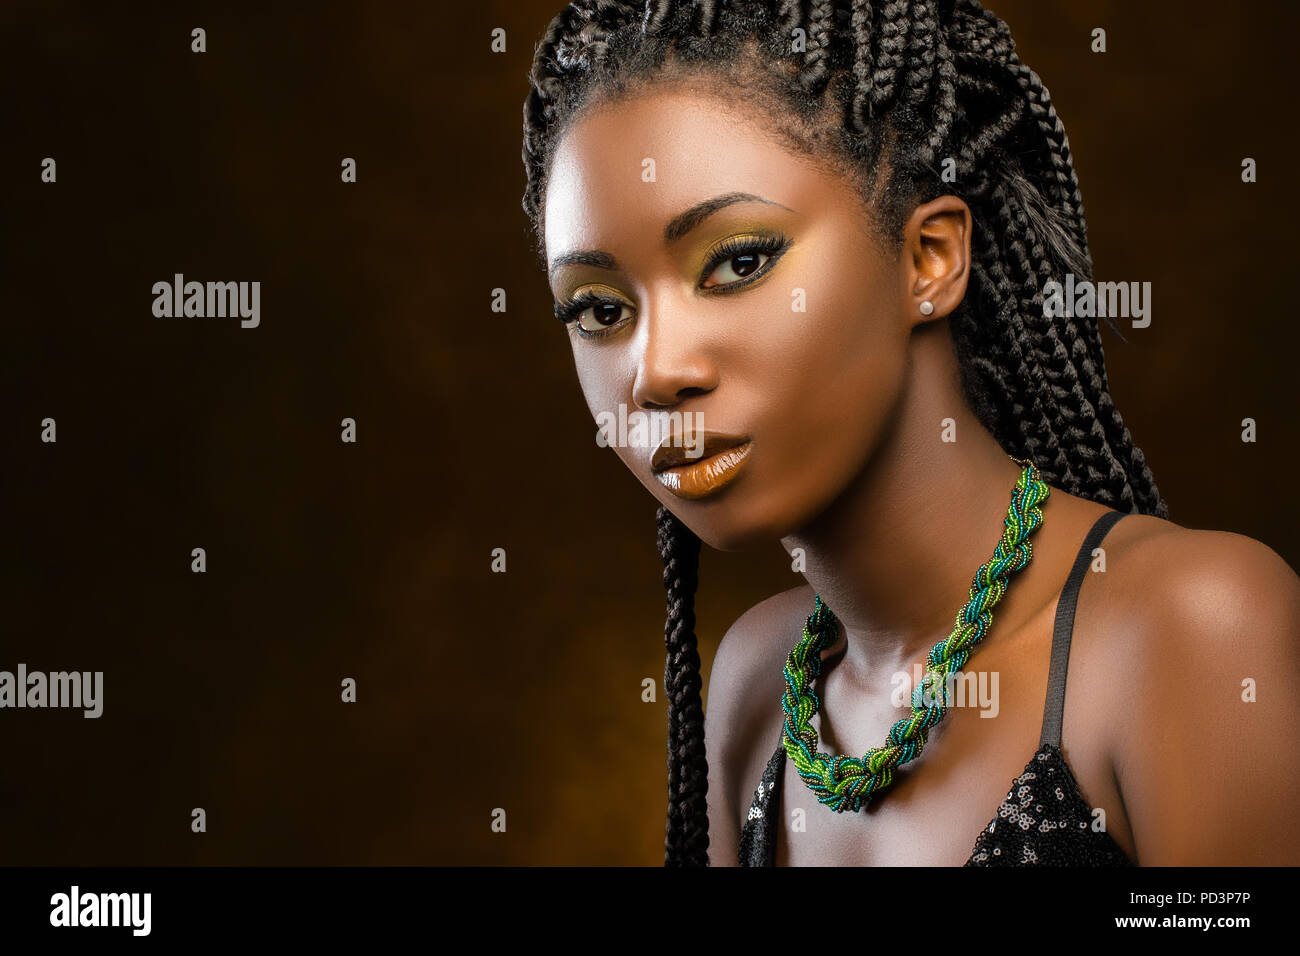 Close up Studio portrait of beautiful young african woman with braids. Low key face shot of elegant girl looking at camera against dark background. Stock Photo